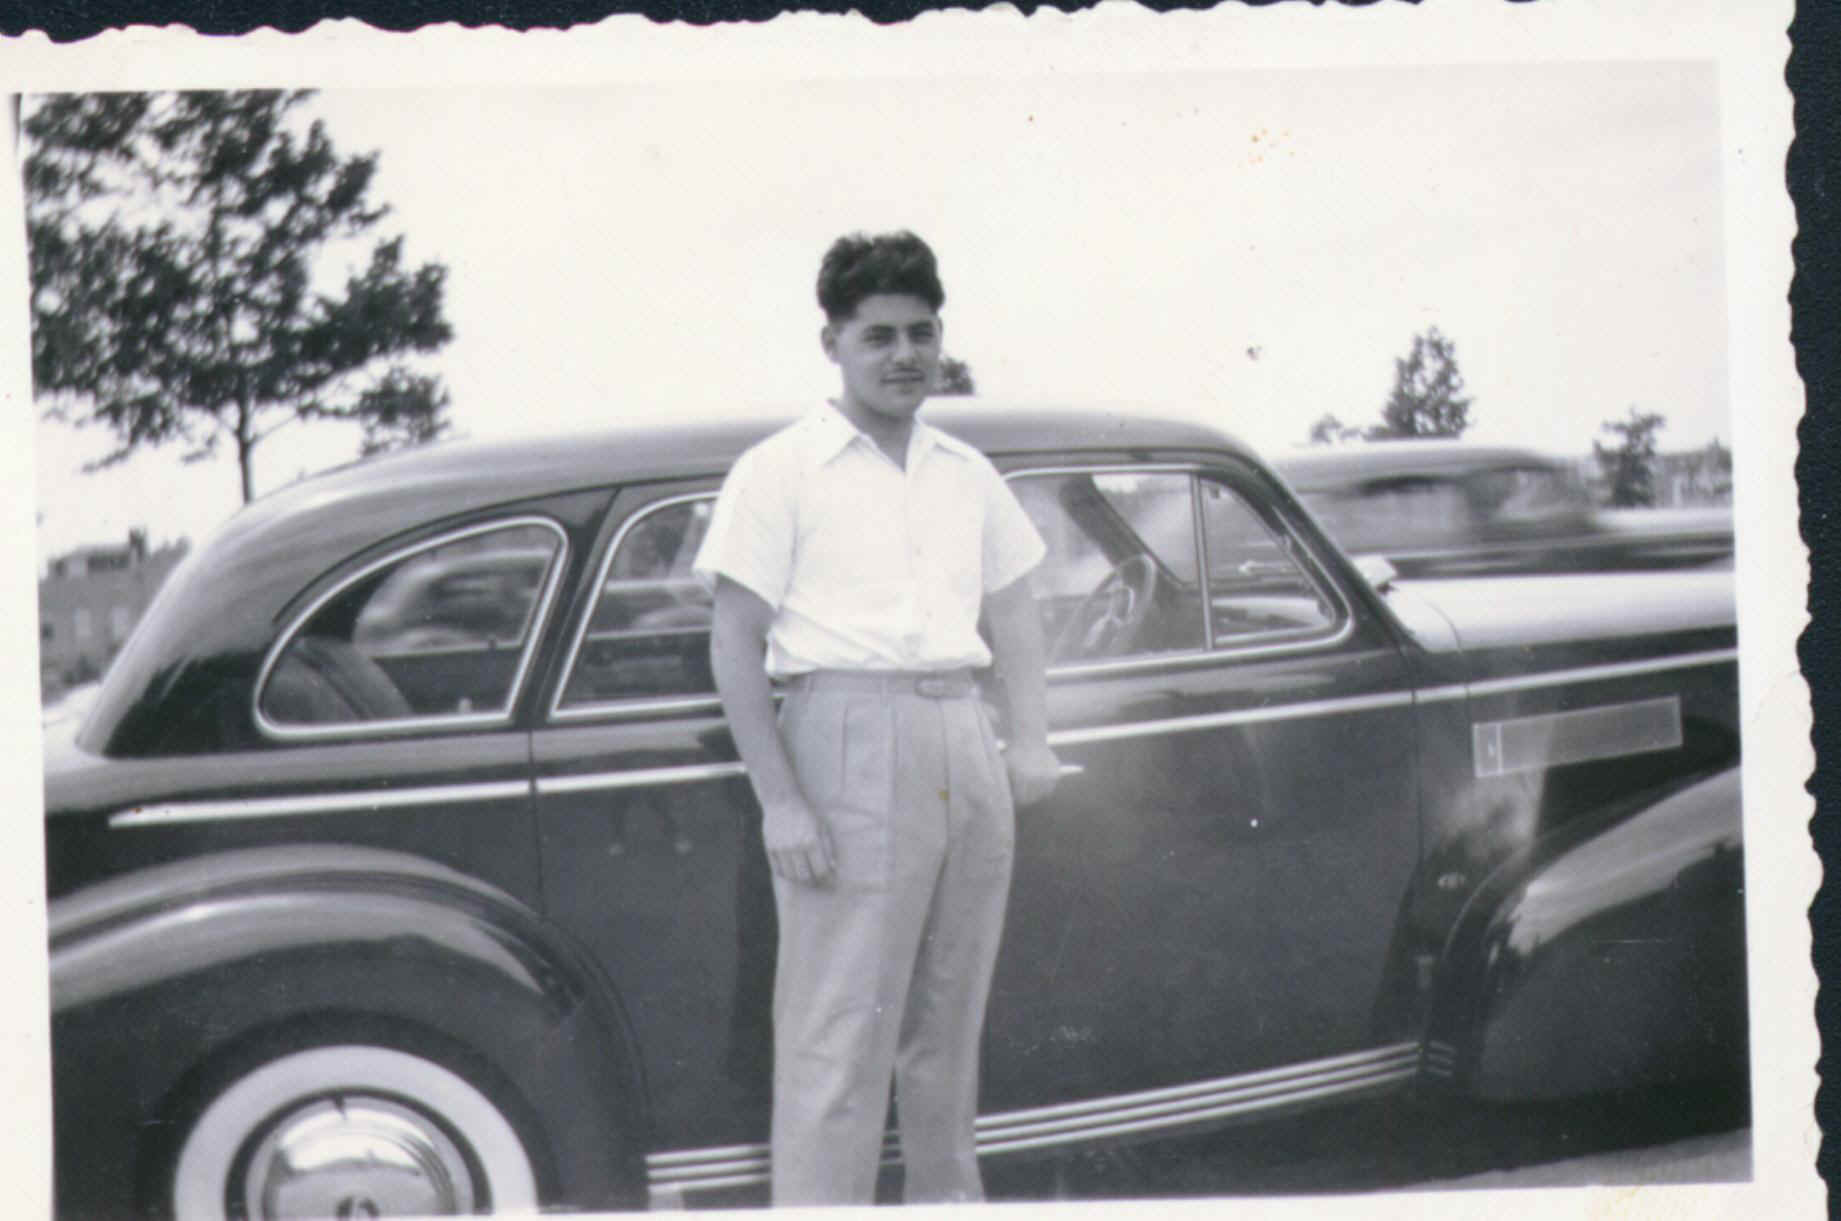 This Is Abe is the 1940's . Sweet Car Grandpa. Those are some fat whitewalls